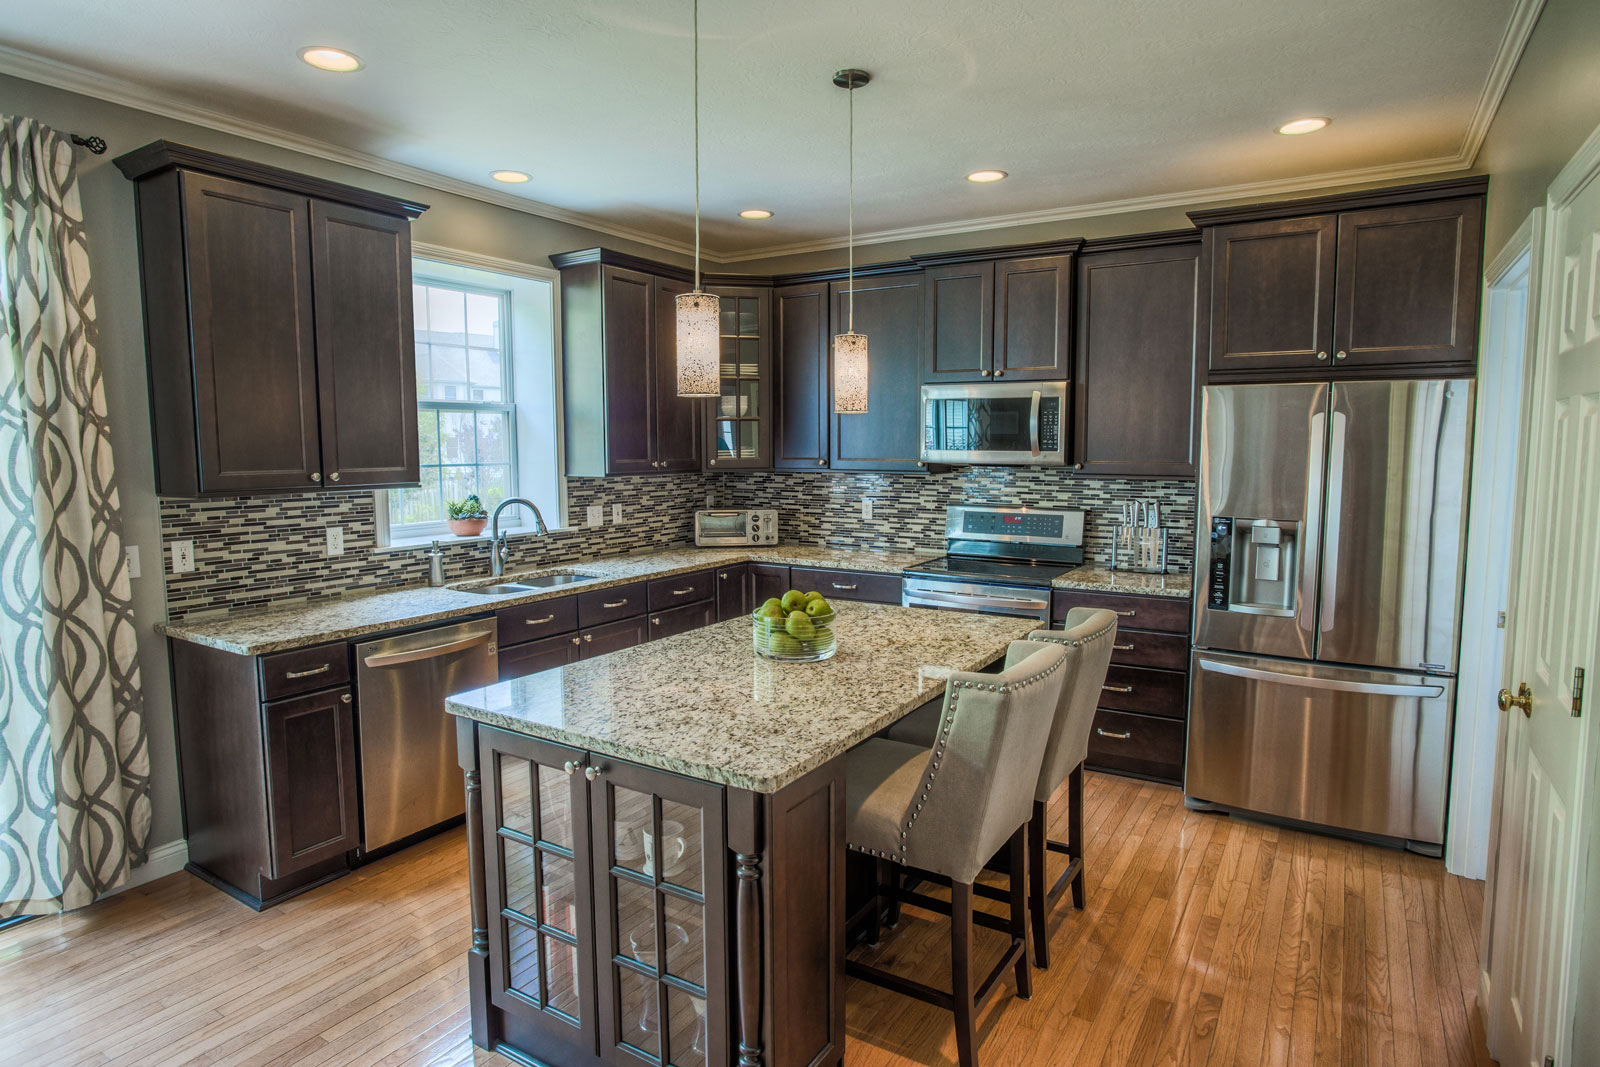 Kitchen Remodeling & Design in West Lafayette, Indiana